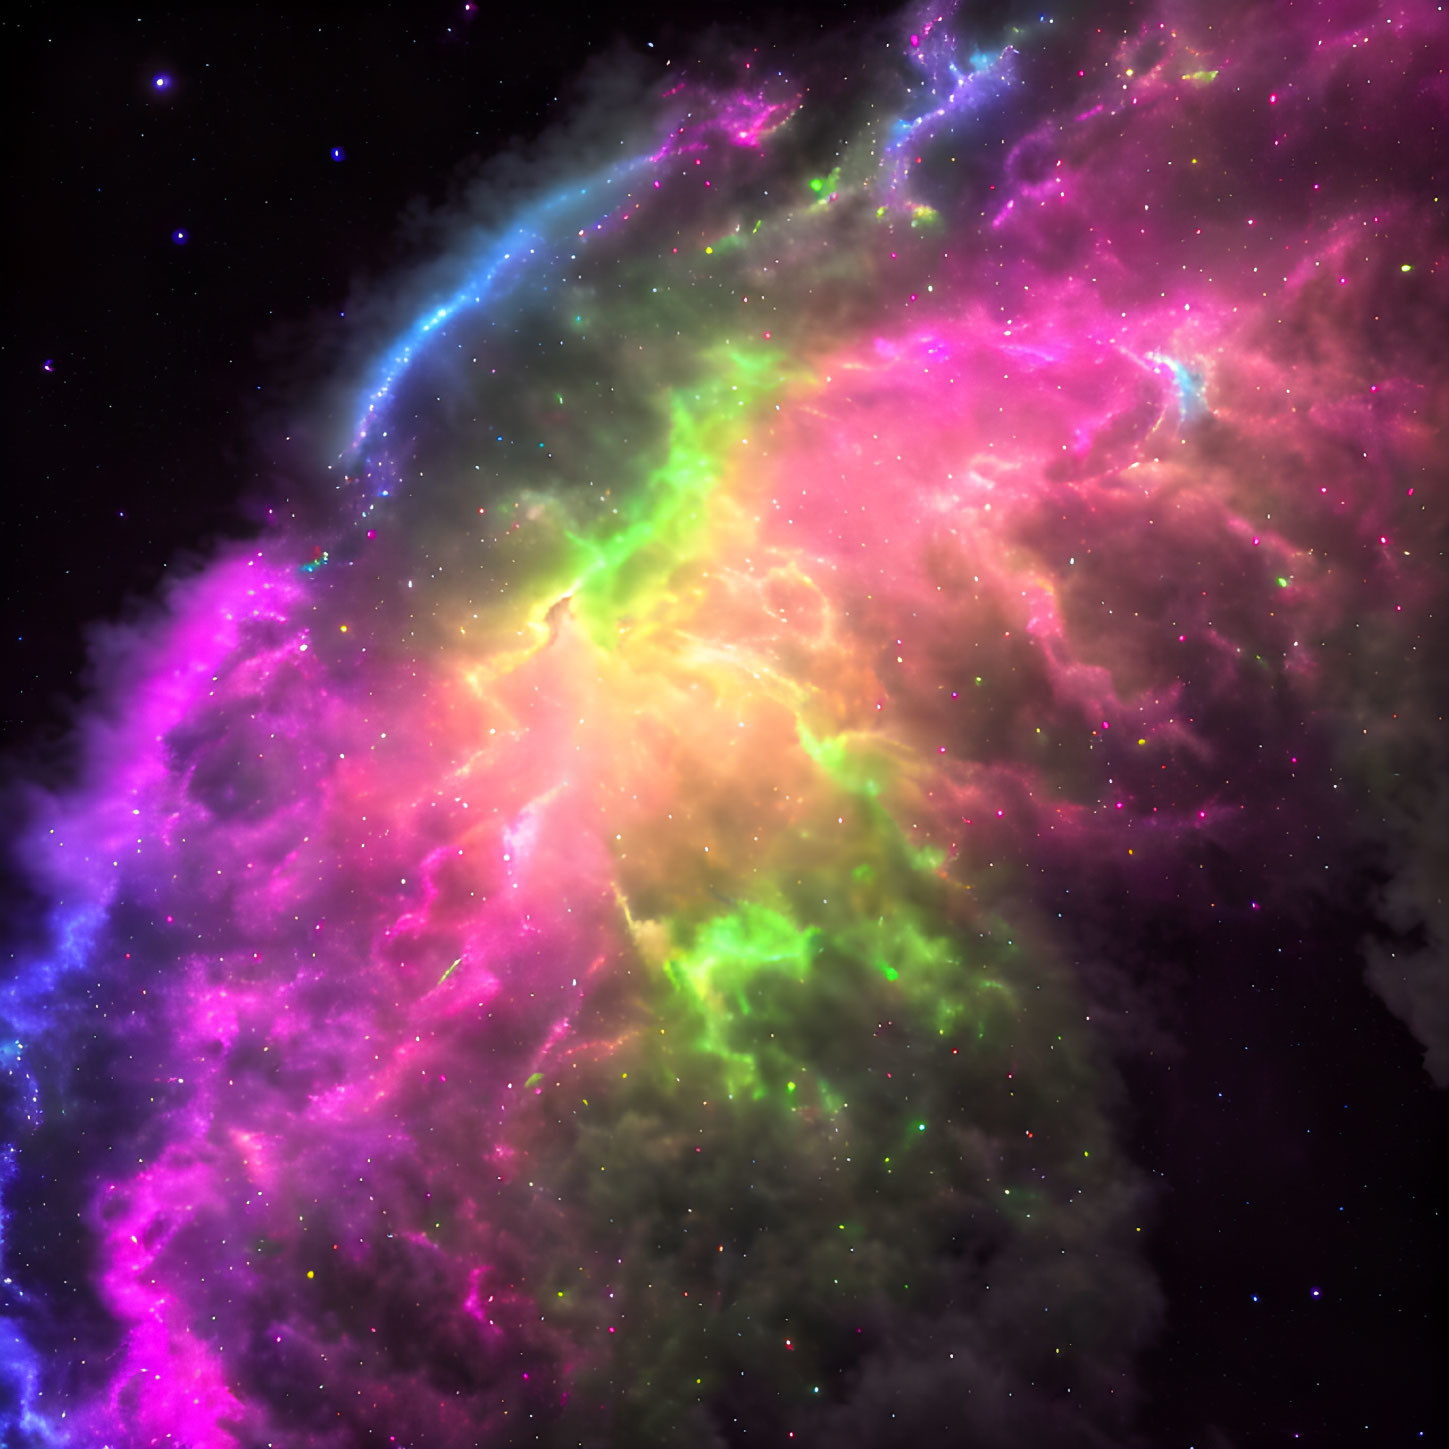 Colorful swirling cosmic nebula in pink, purple, green, and blue hues